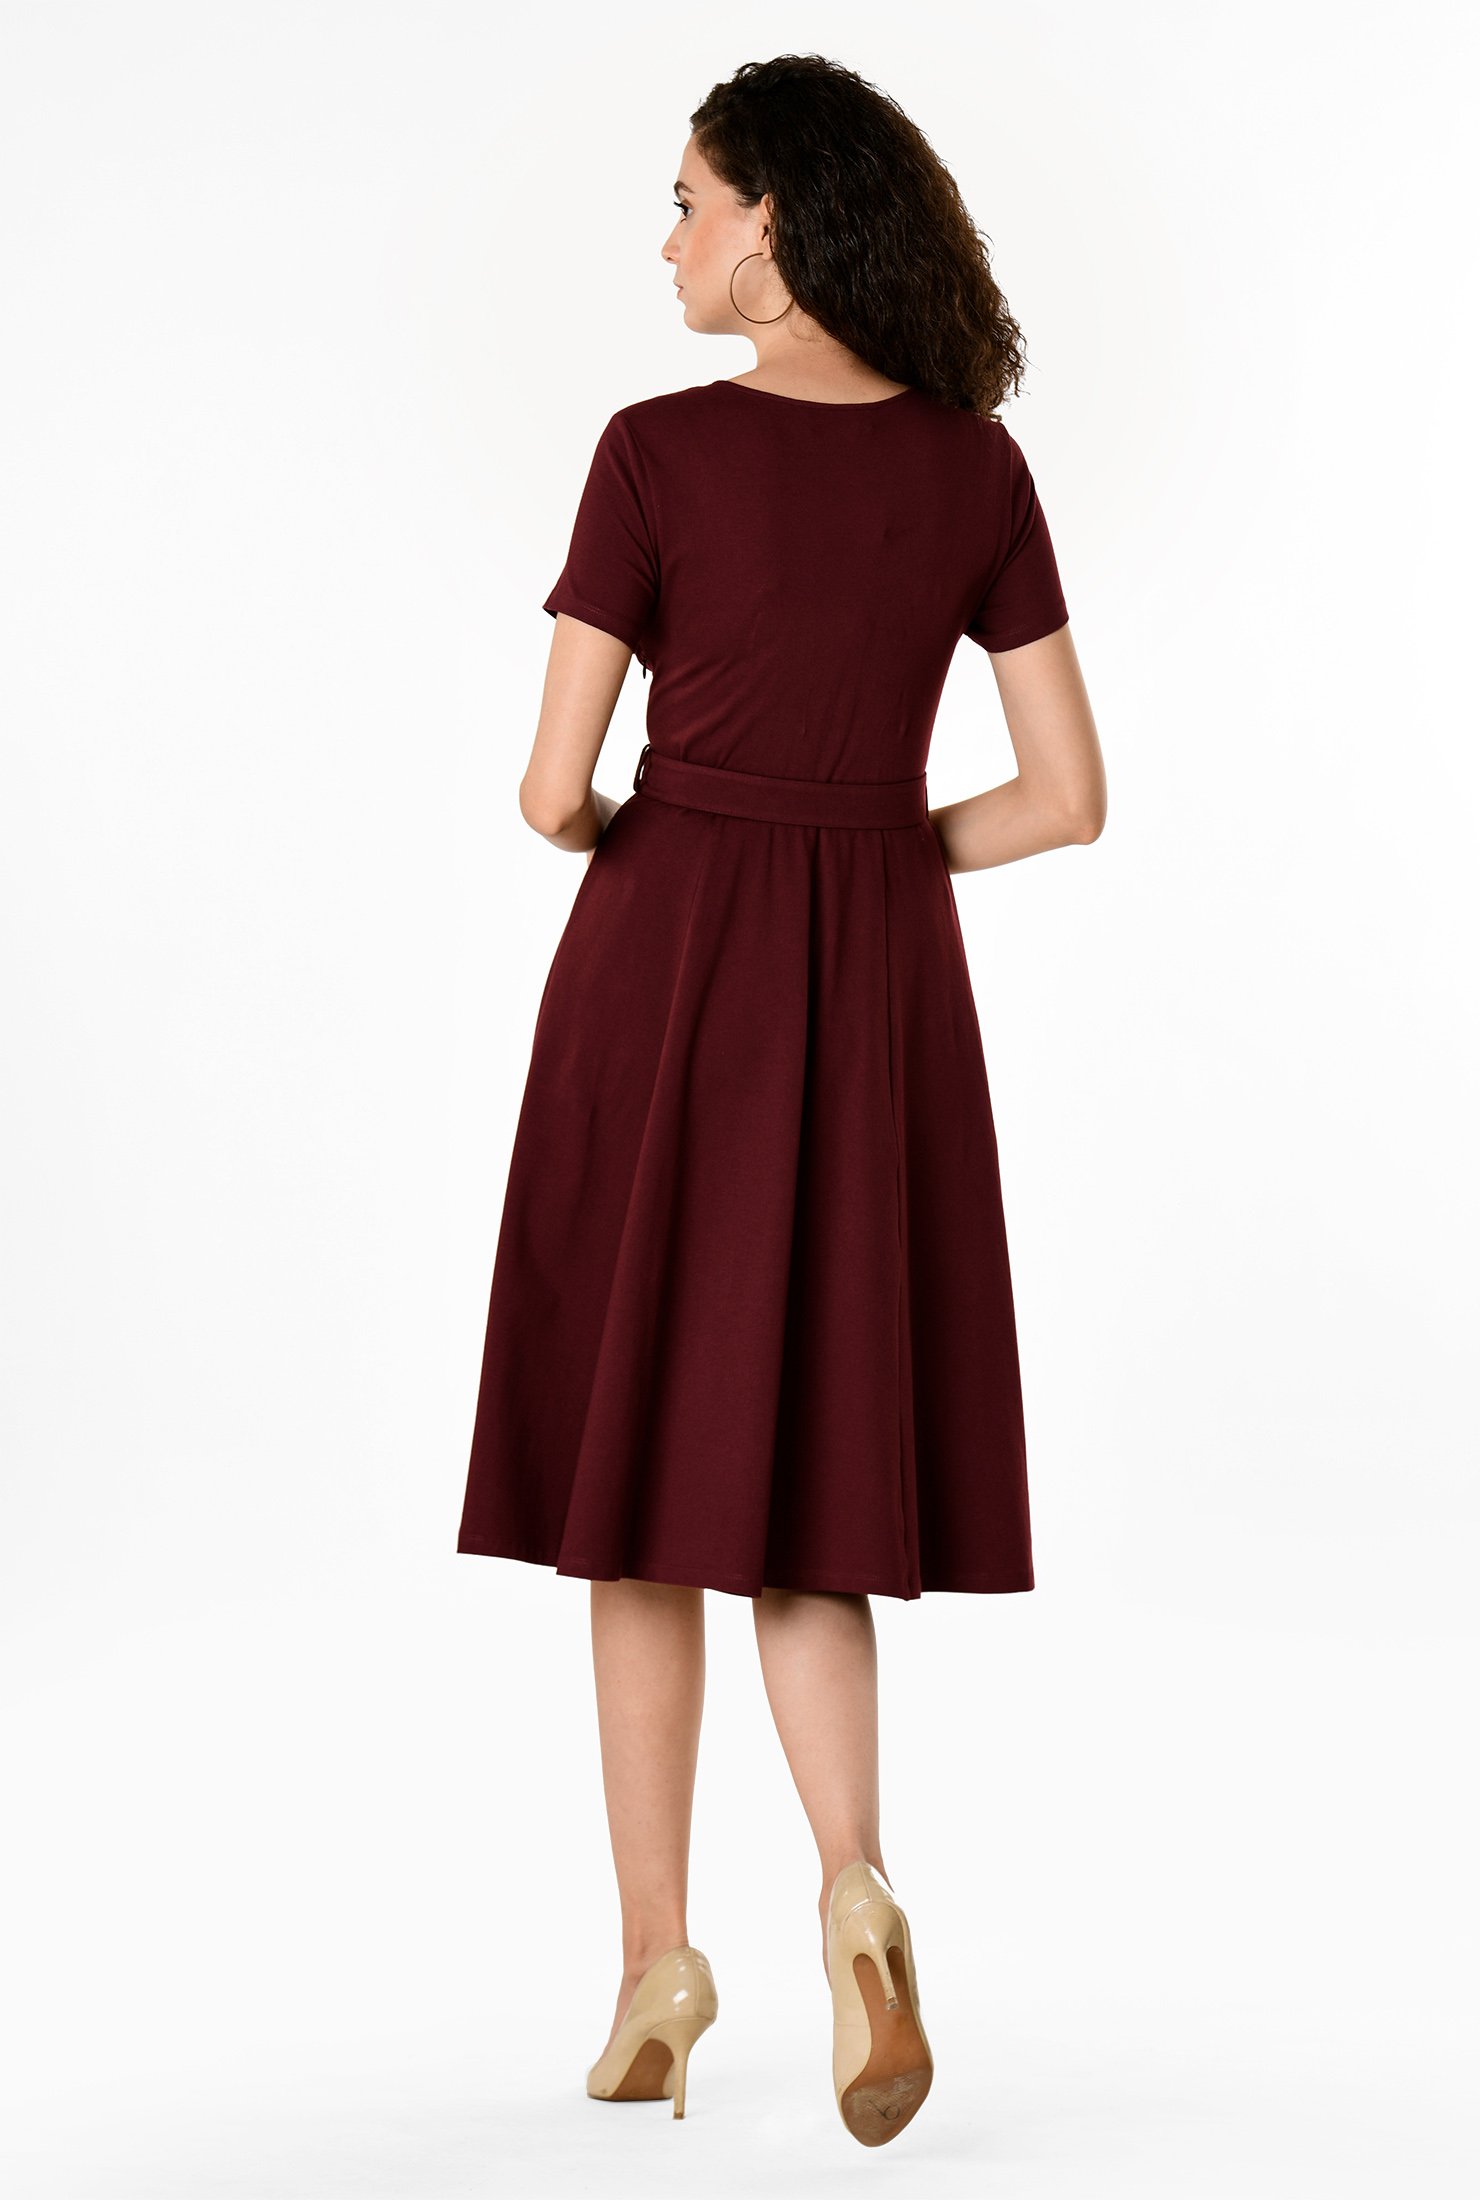 Cotton knit fit-and-flare dress